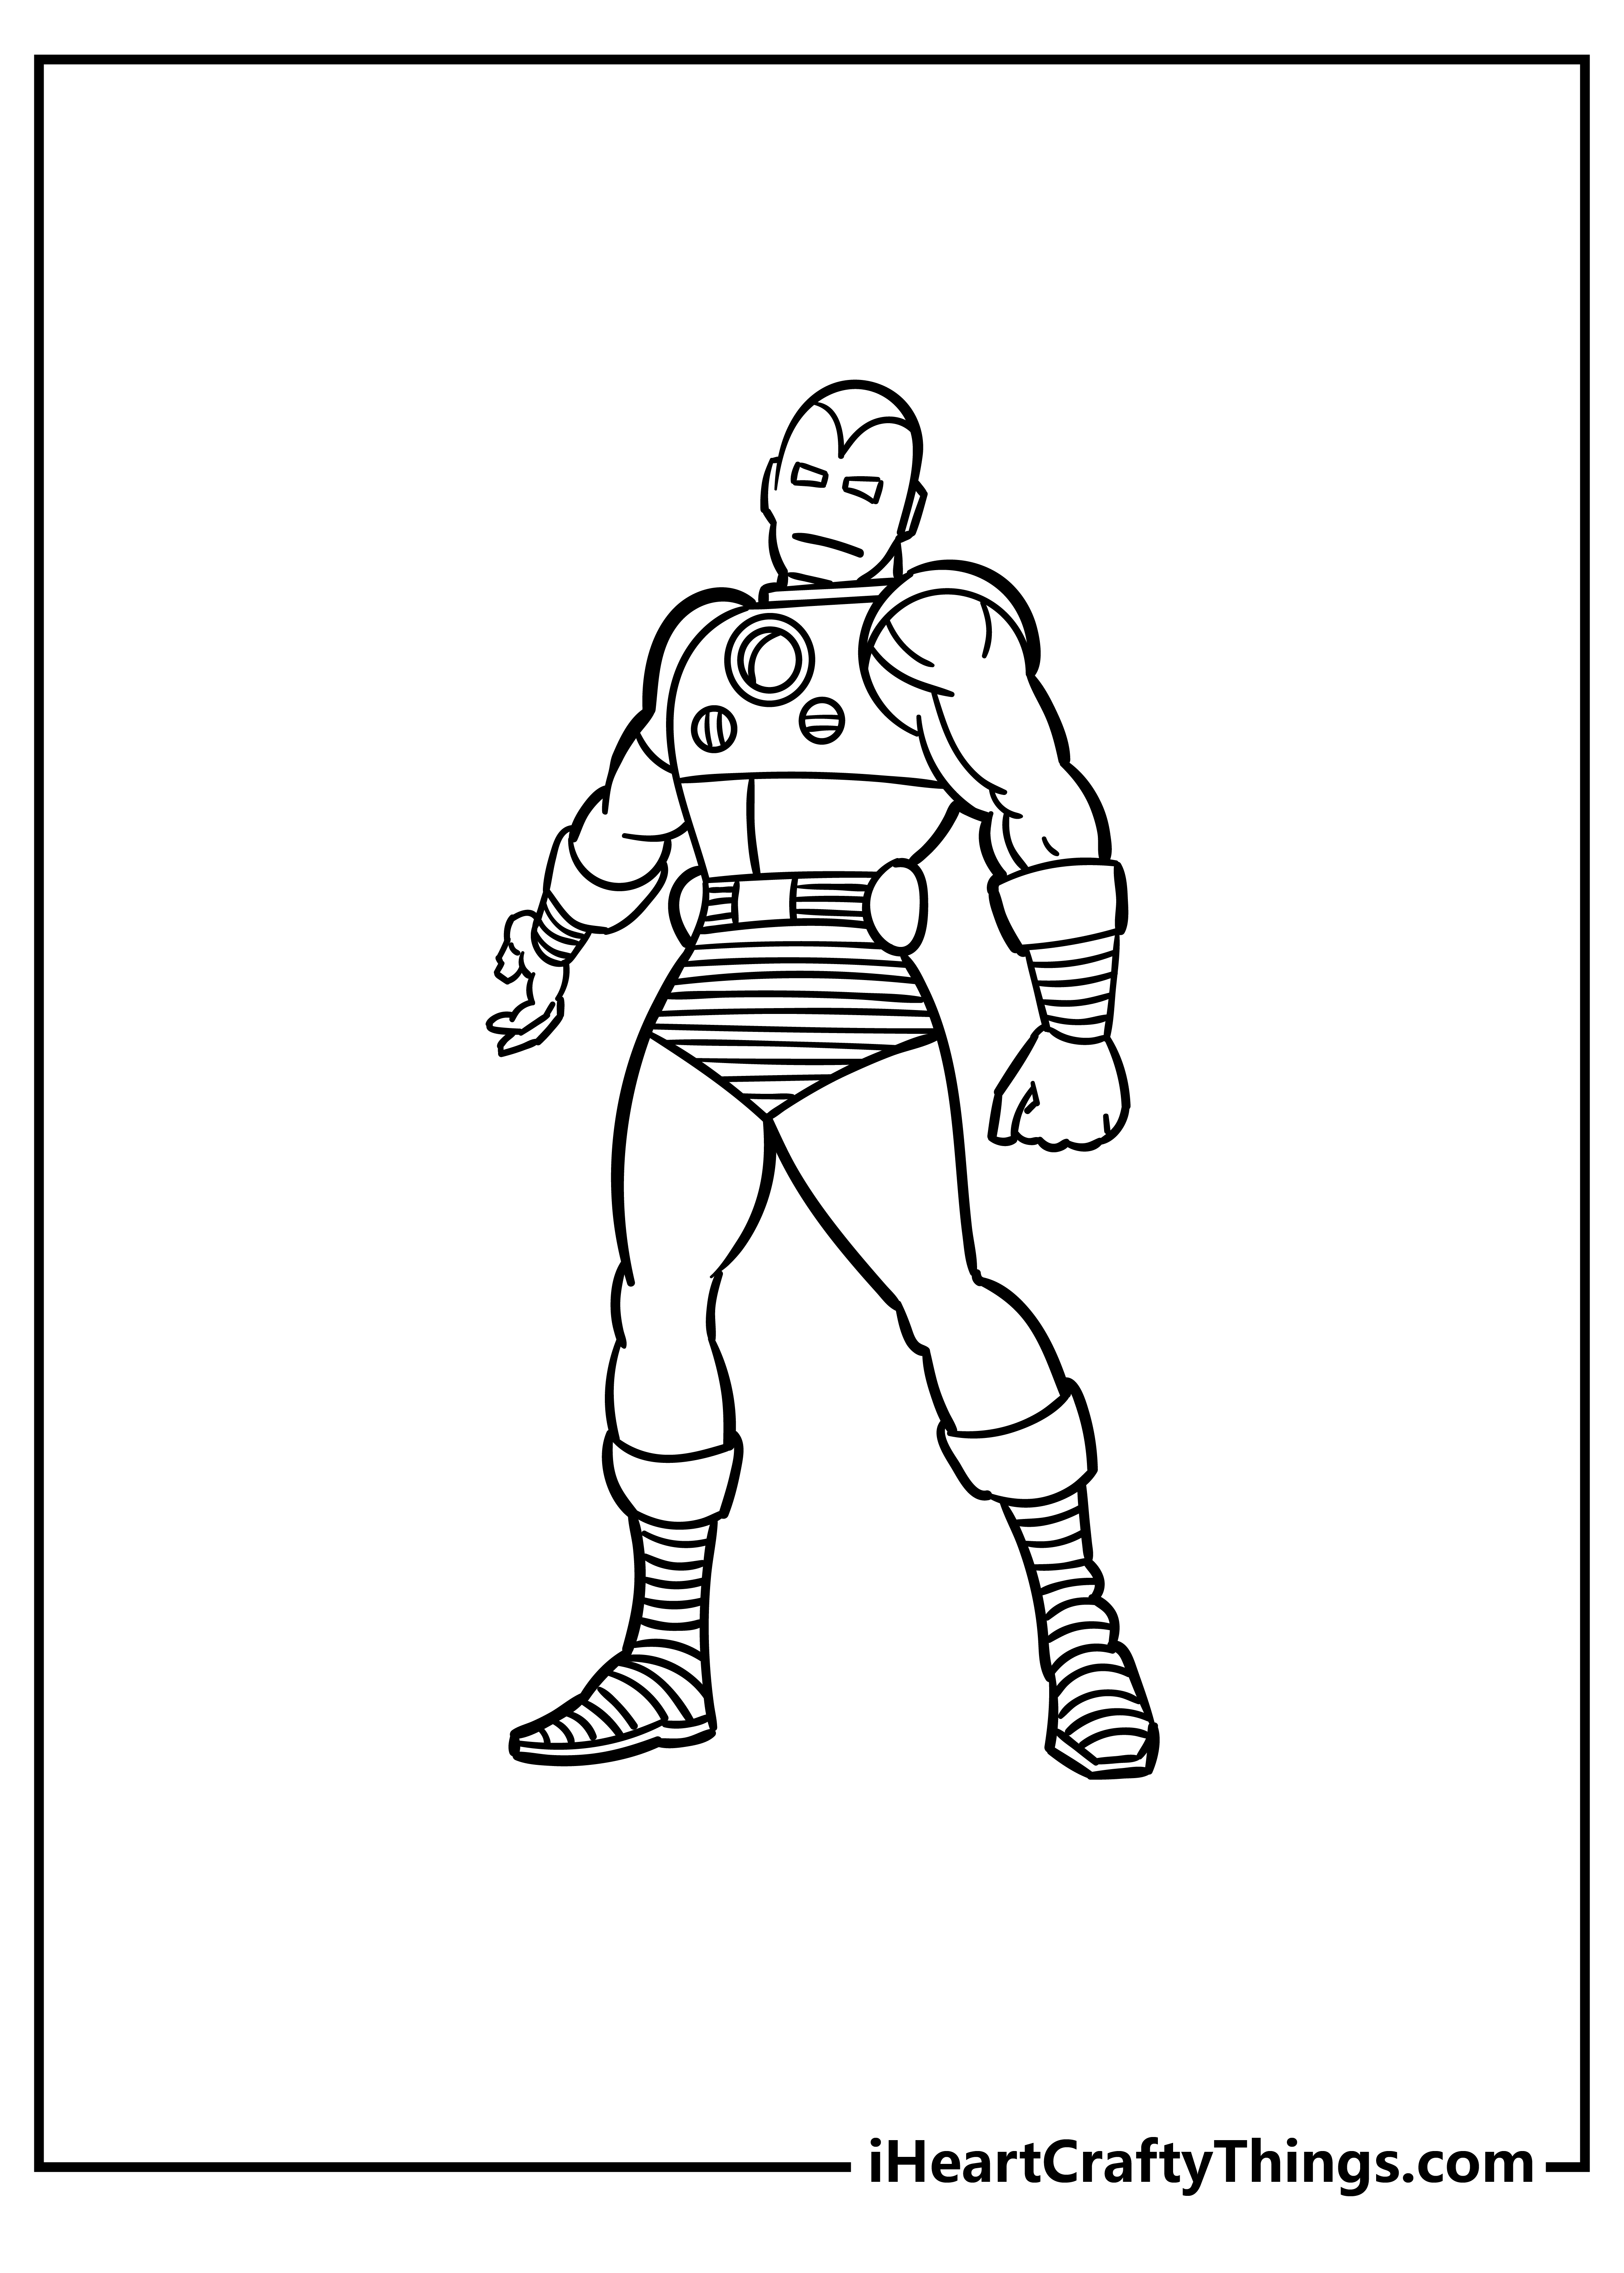 Iron Man Coloring Pages for preschoolers free printable